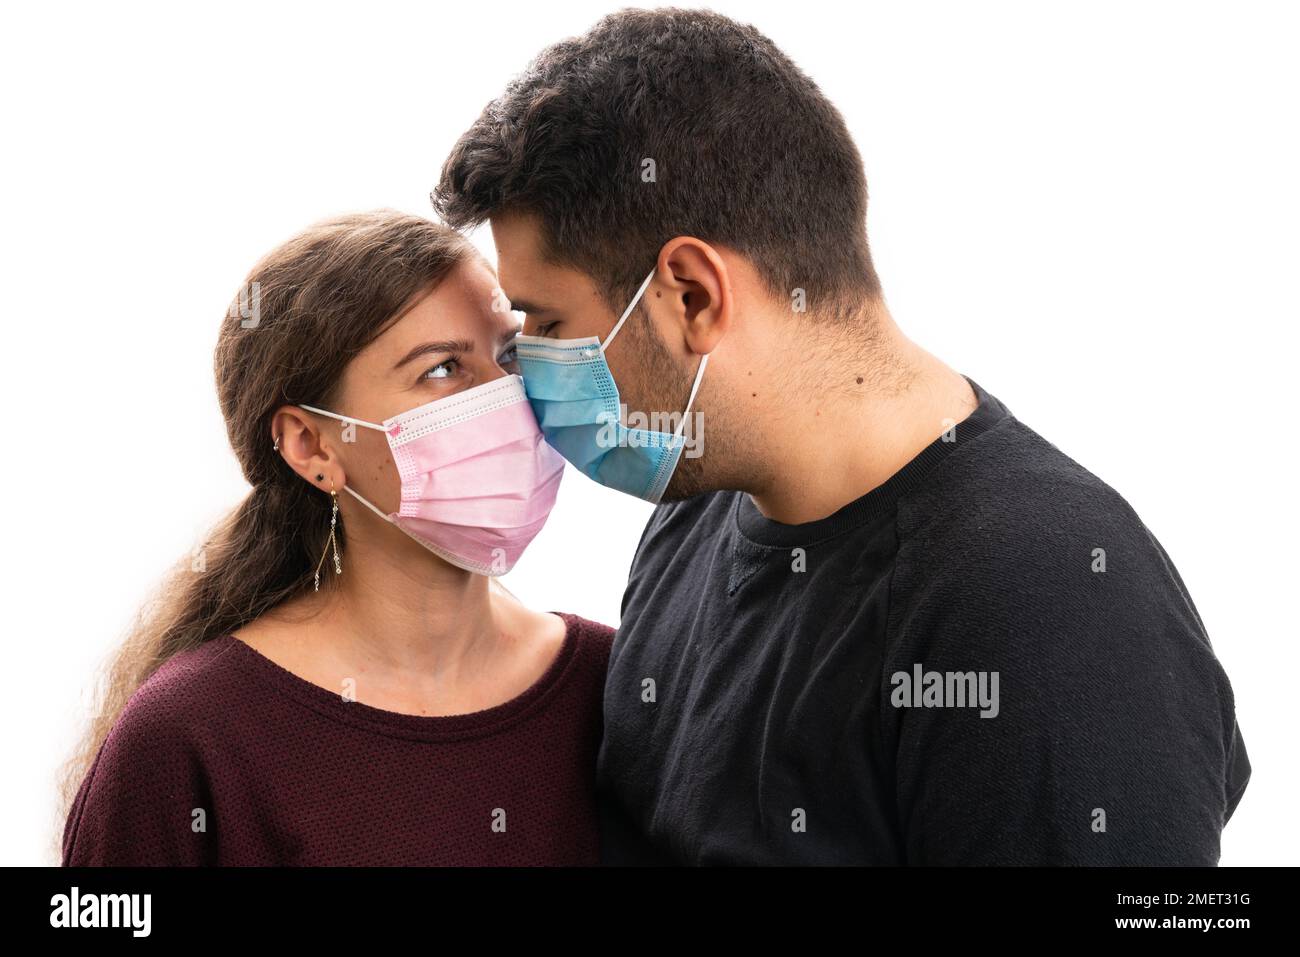 Adult woman and man couple wearing medical or surgical mask pink blue touching nose as eskimo kiss loving isolated on white studio background Stock Photo